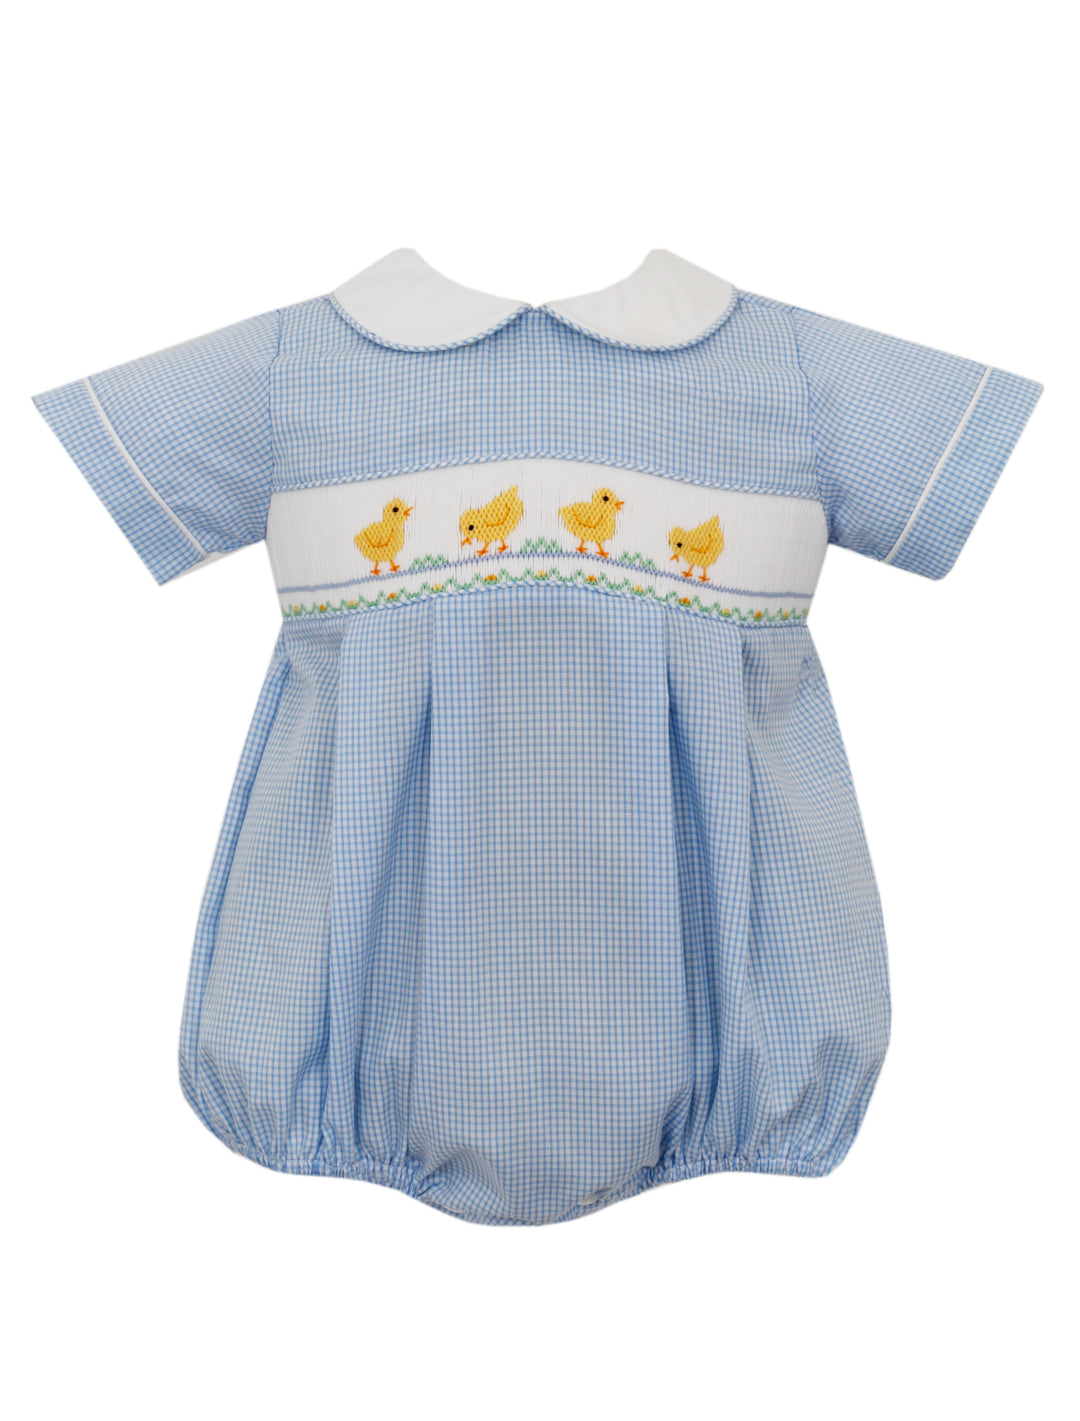 Boy Bubble- Blue Gingham with Chick Smocking